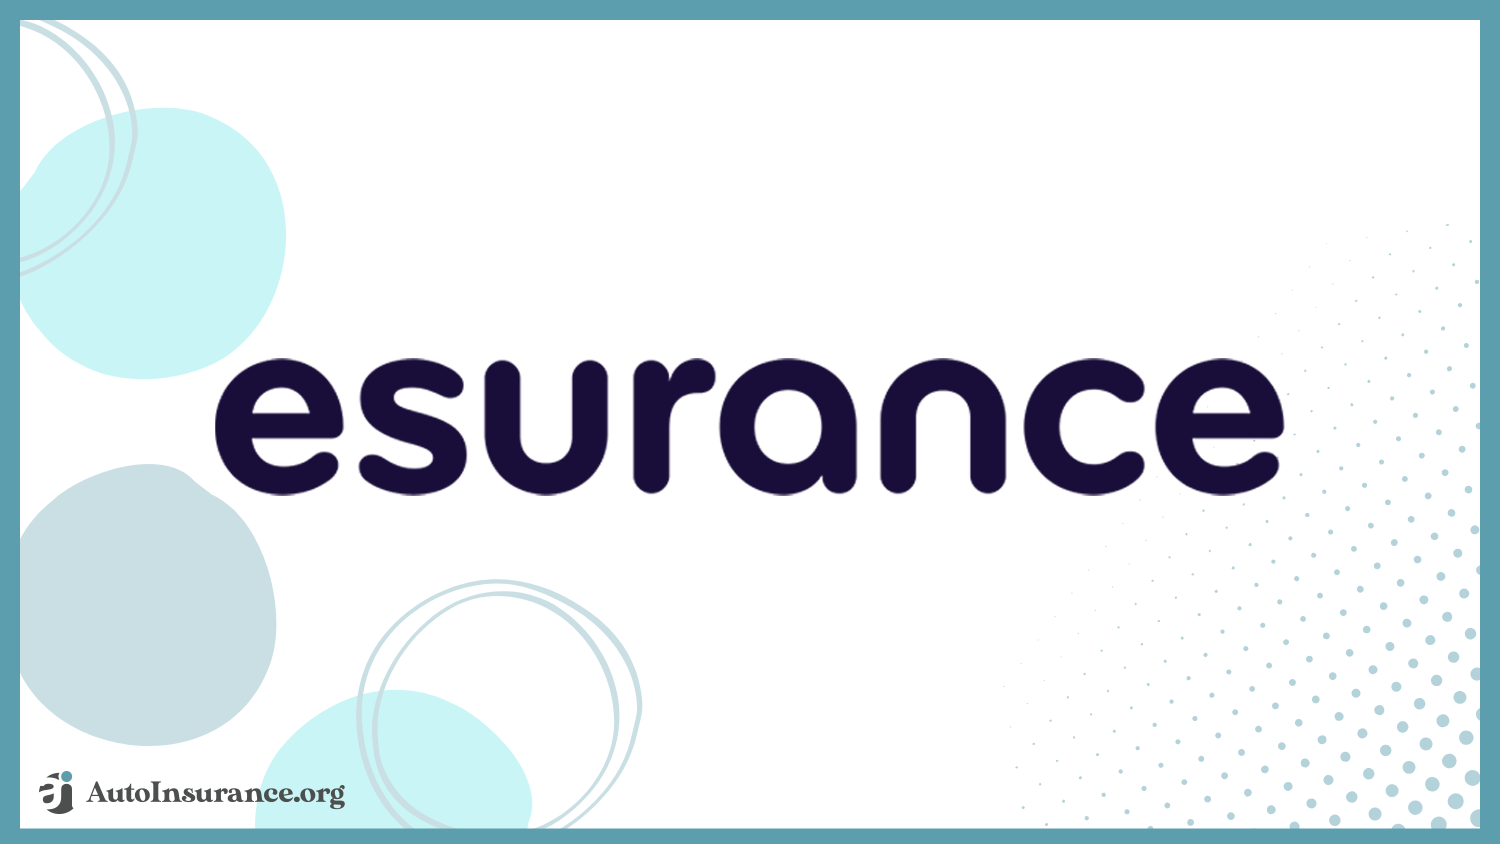 Esurance: Best Auto Insurance Companies for Drivers With Bad Credit